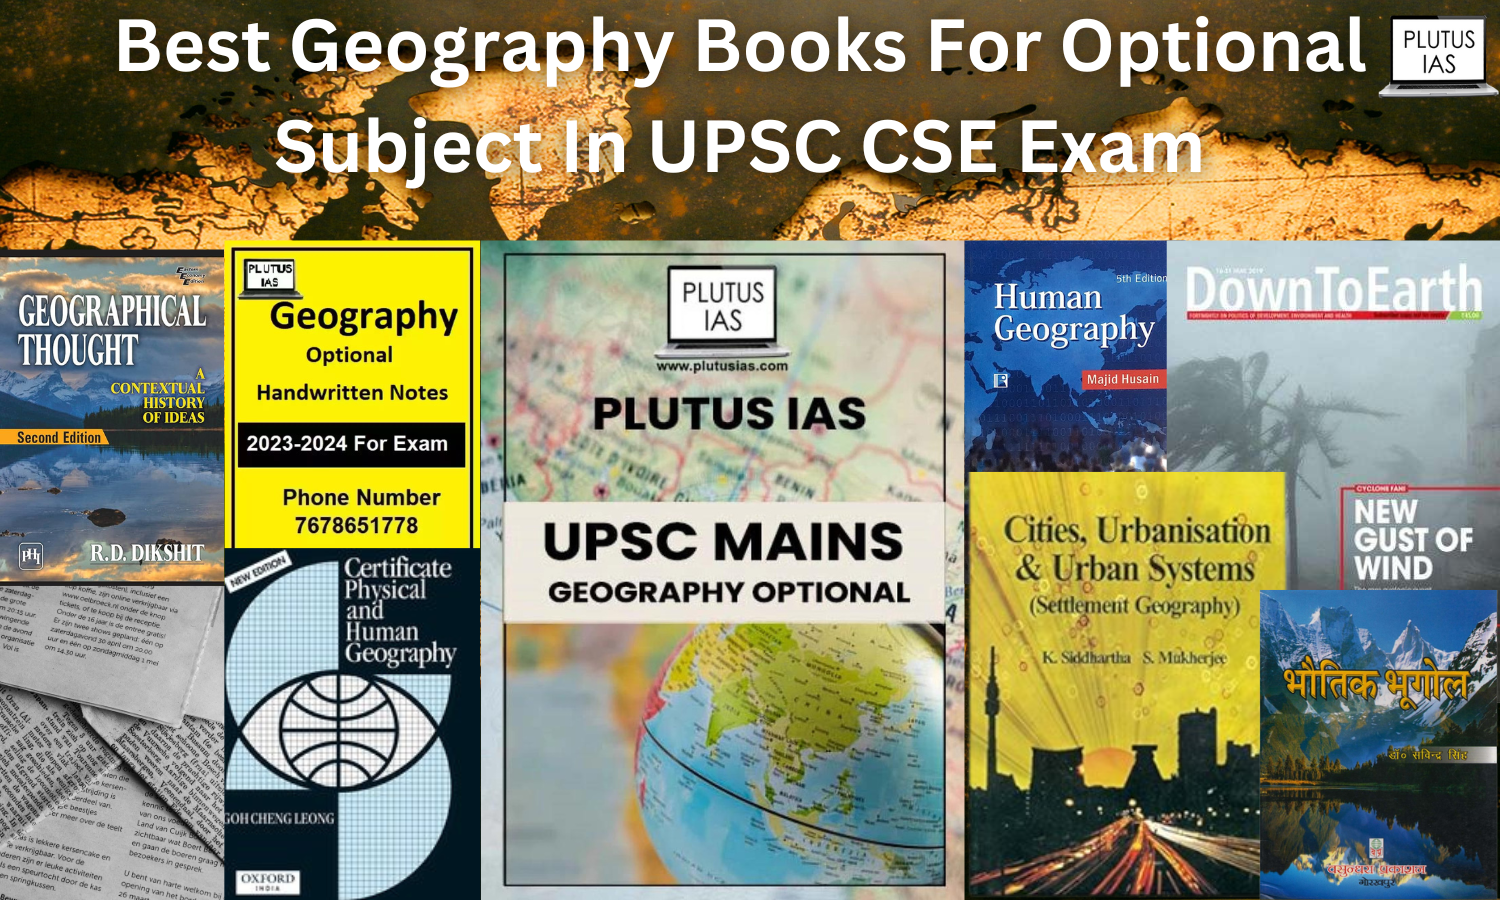 Geography optional books for UPSC